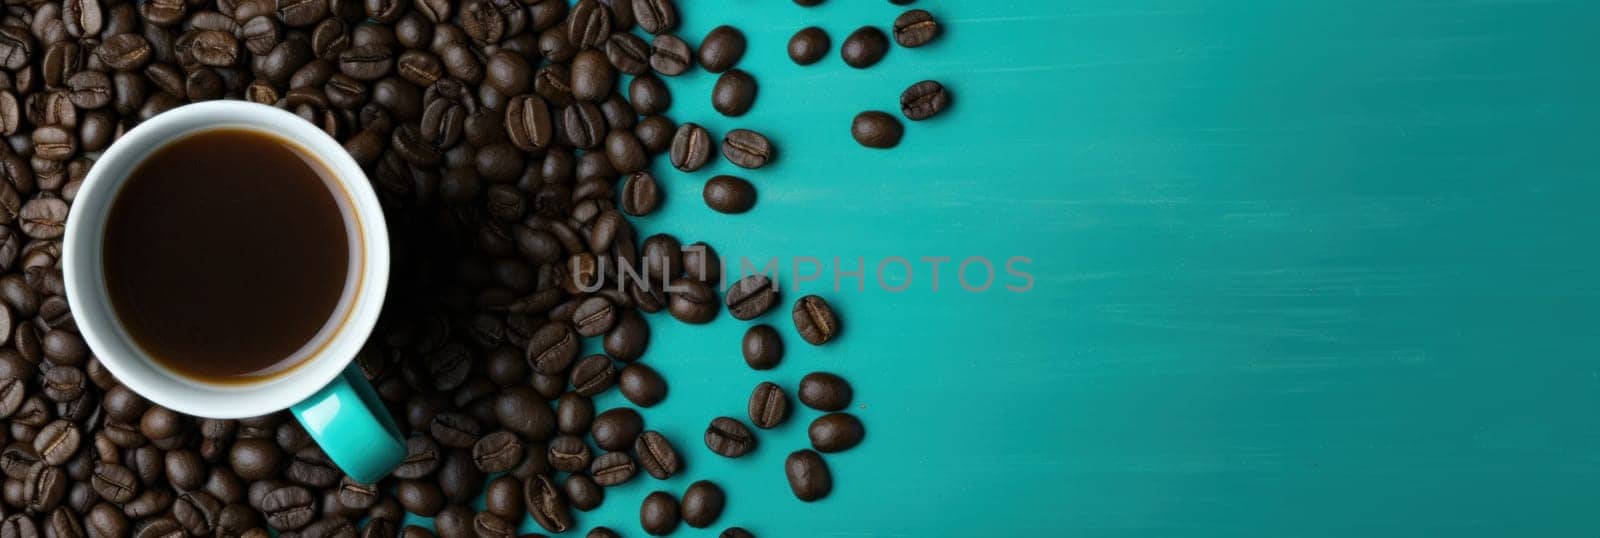 A cup of coffee is surrounded by beans on a turquoise background, AI by starush